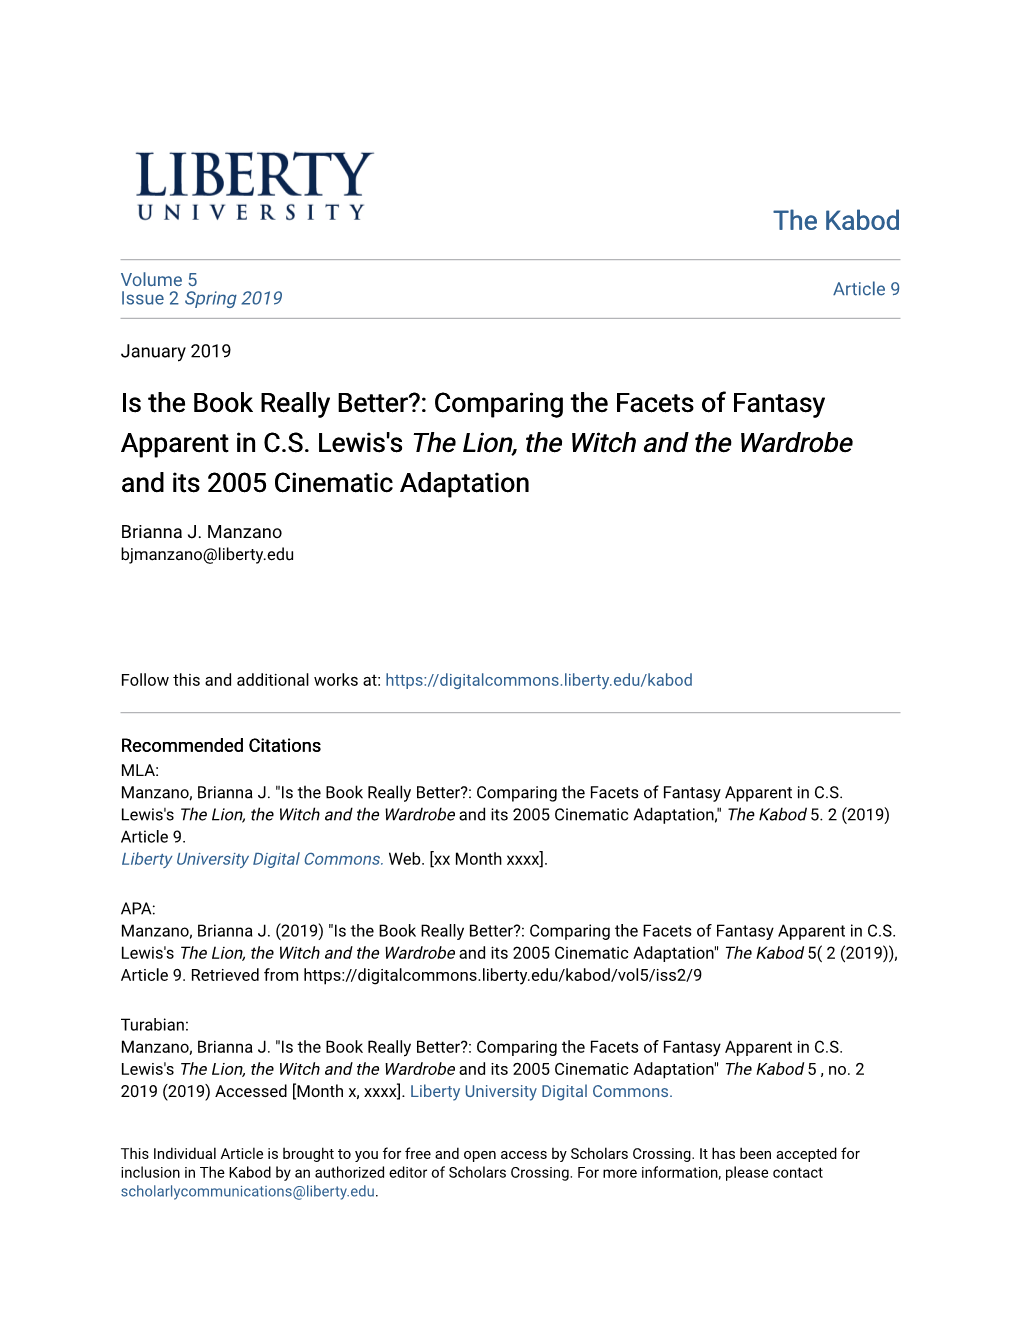 Is the Book Really Better?: Comparing the Facets of Fantasy Apparent in C.S